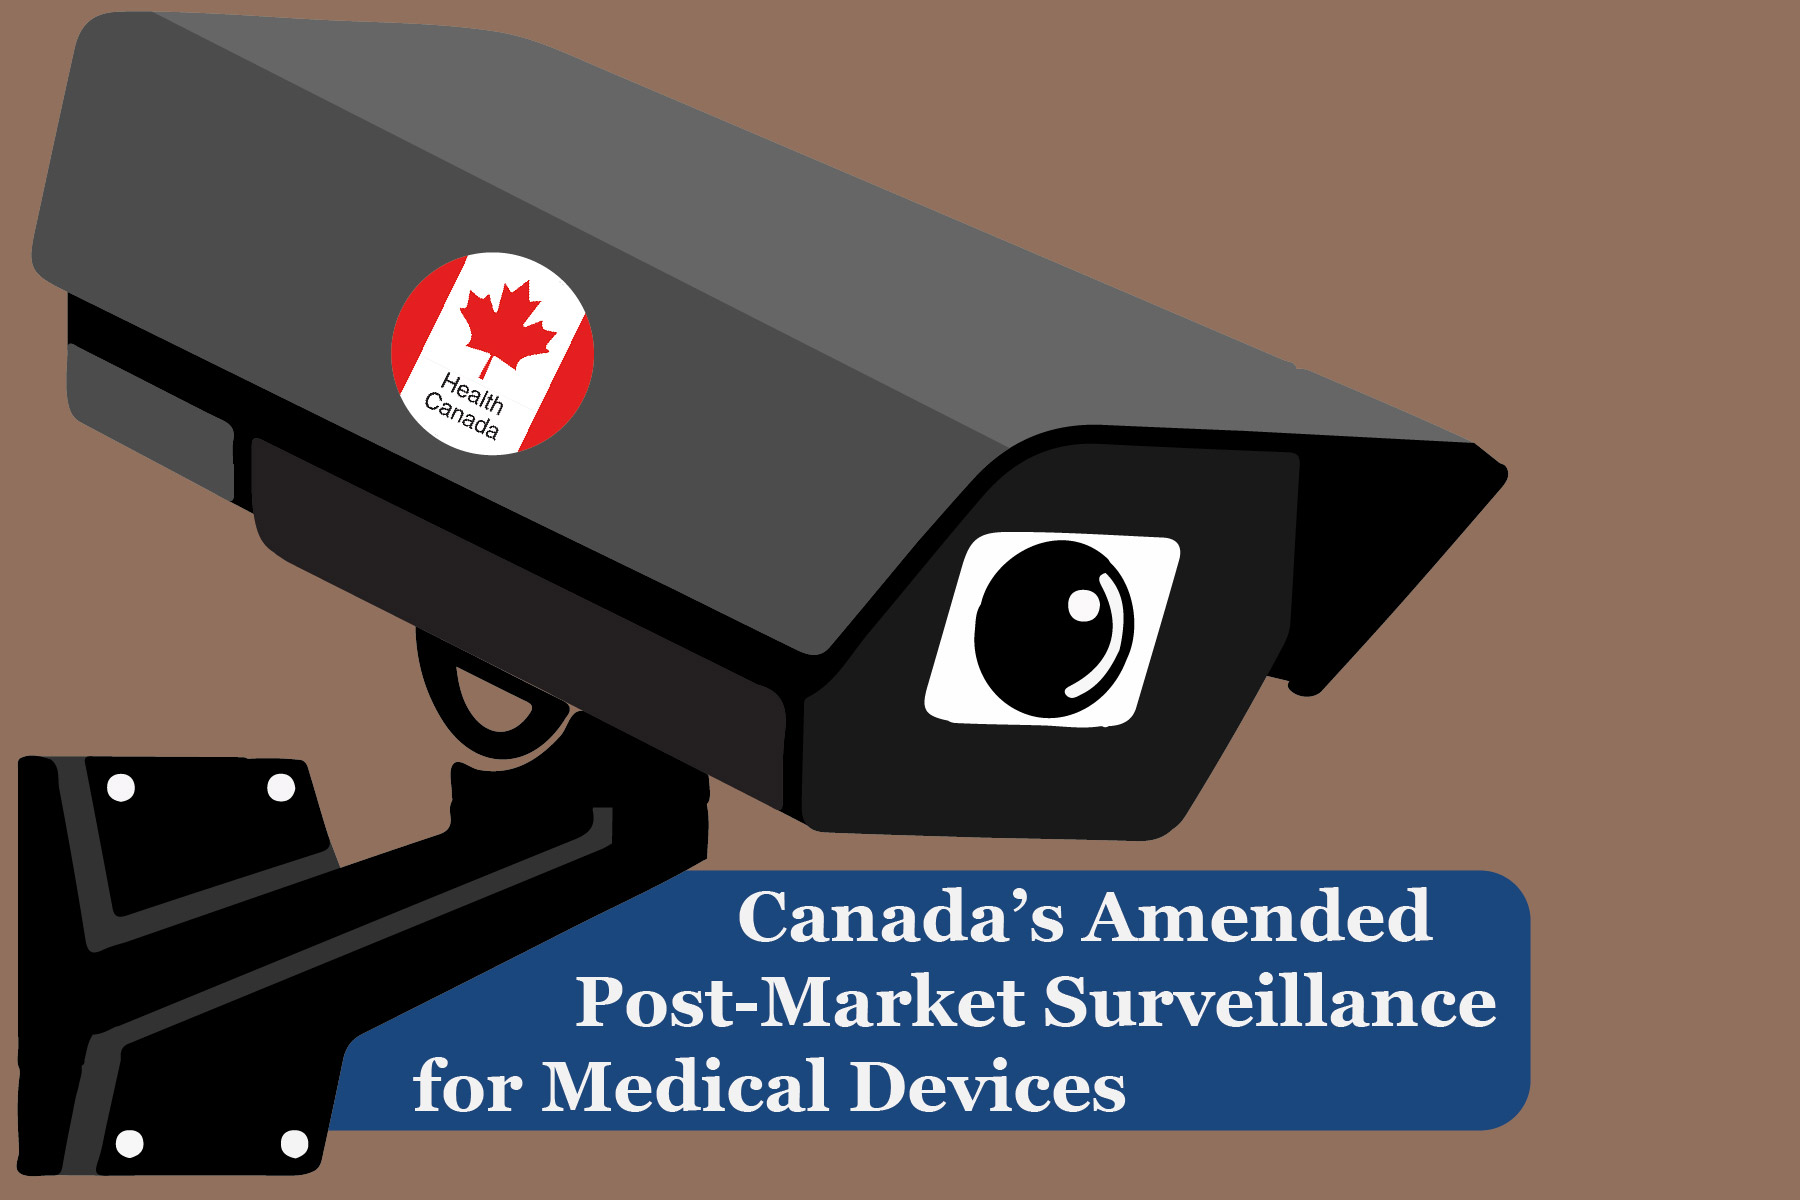 Canada’s Amended Post-Market Surveillance for Medical Devices